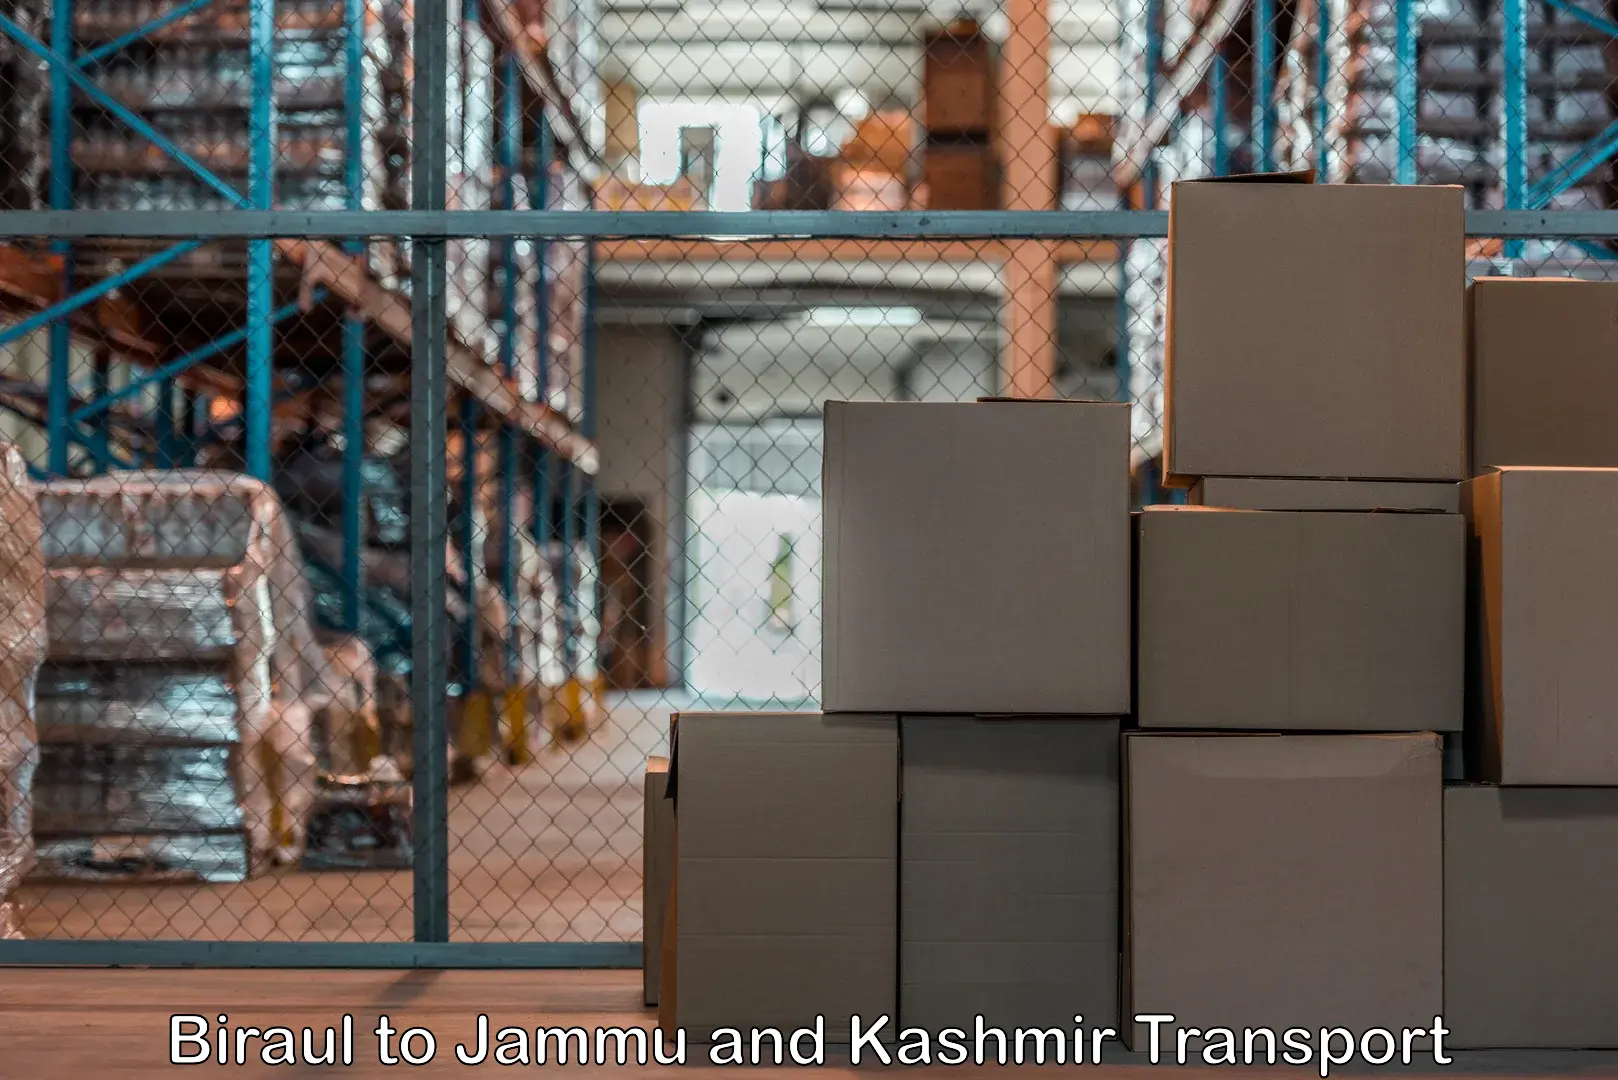 Air freight transport services in Biraul to Jammu